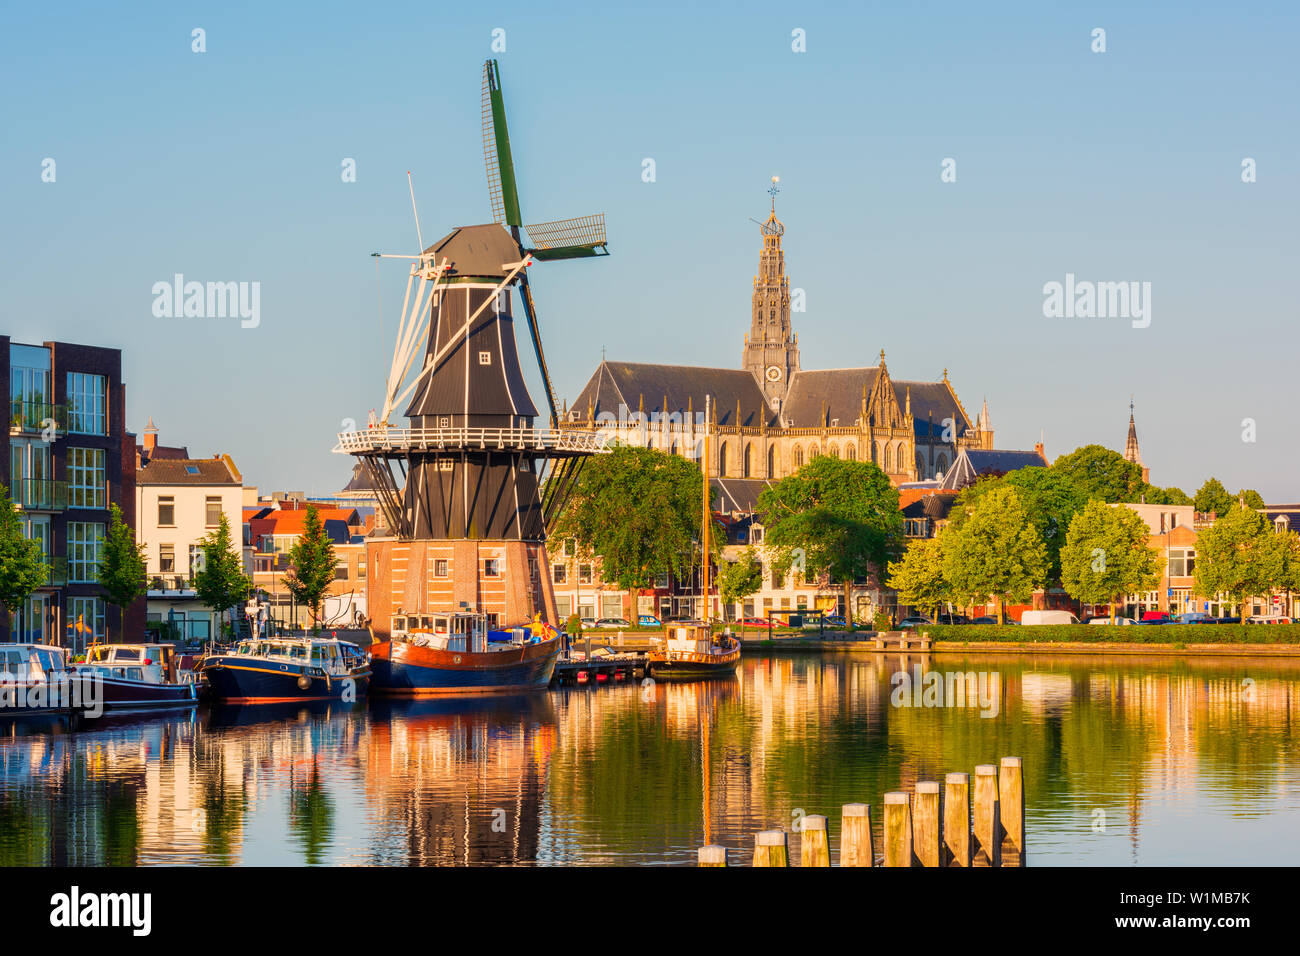 Skyline of Haarlem, North Holland, Netherlands, with Windmill 'De Adriaan' from 1779 and 13th Century Saint Bavo Church Stock Photo